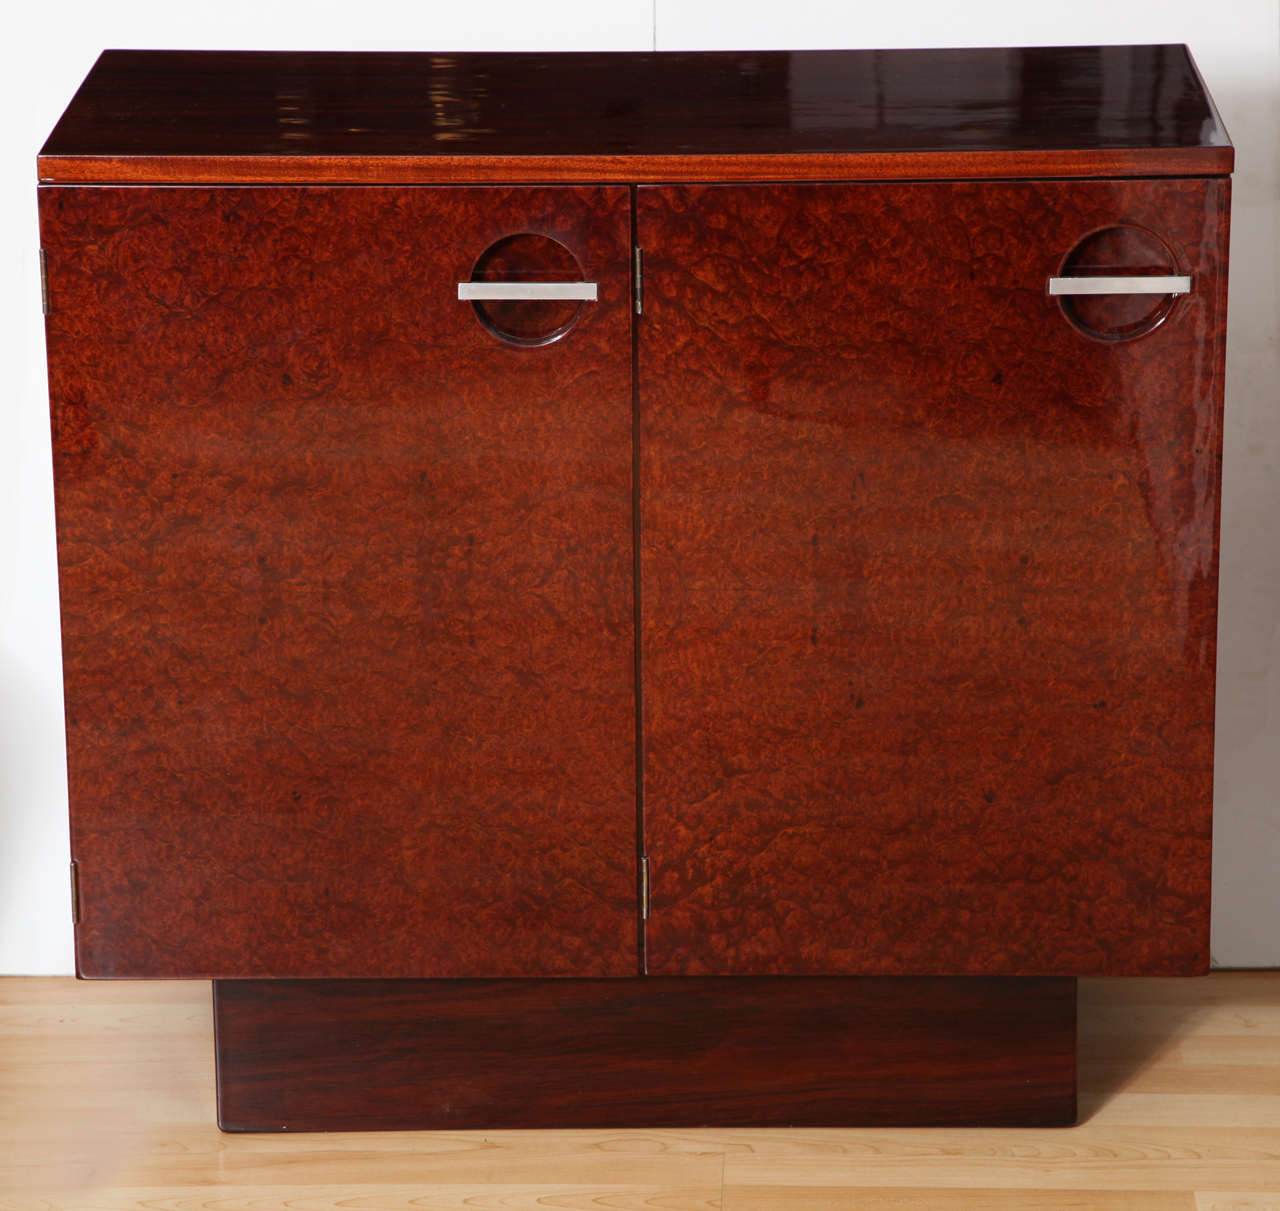 Gilbert Rohde Art Deco small sideboard by Herman Miller in rosewood, burl, and mahogany with satin nickel hardware.